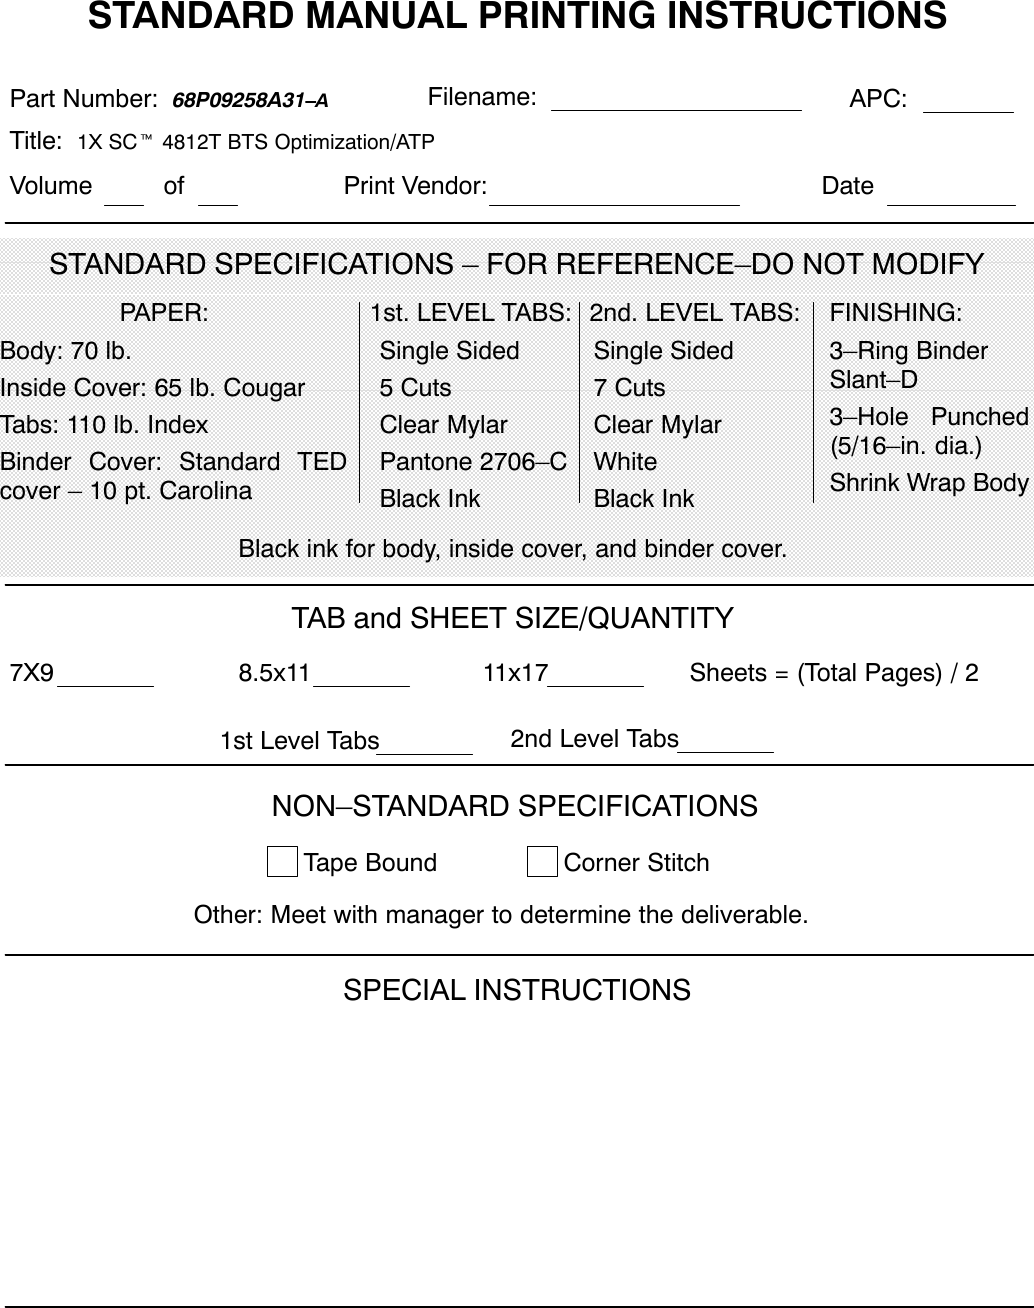 STANDARD MANUAL PRINTING INSTRUCTIONSSTANDARD SPECIFICATIONS – FOR REFERENCE–DO NOT MODIFYPart Number:  68P09258A31–A APC:Title:  1X SCt 4812T BTS Optimization/ATP PAPER:Body: 70 lb.Inside Cover: 65 lb. CougarTabs: 110 lb. IndexBinder Cover: Standard TEDcover – 10 pt. Carolina1st. LEVEL TABS:Single Sided5 CutsClear MylarPantone 2706–CBlack Ink2nd. LEVEL TABS: FINISHING:3–Ring BinderSlant–D3–Hole Punched(5/16–in. dia.)Shrink Wrap BodyBlack ink for body, inside cover, and binder cover.SPECIAL INSTRUCTIONSTAB and SHEET SIZE/QUANTITY7X9 8.5x11 11x17NON–STANDARD SPECIFICATIONSTape Bound Corner Stitch   Other: Meet with manager to determine the deliverable.Sheets = (Total Pages) / 2Single Sided7 CutsClear MylarWhiteBlack InkFilename:1st Level Tabs 2nd Level TabsVolume of DatePrint Vendor: